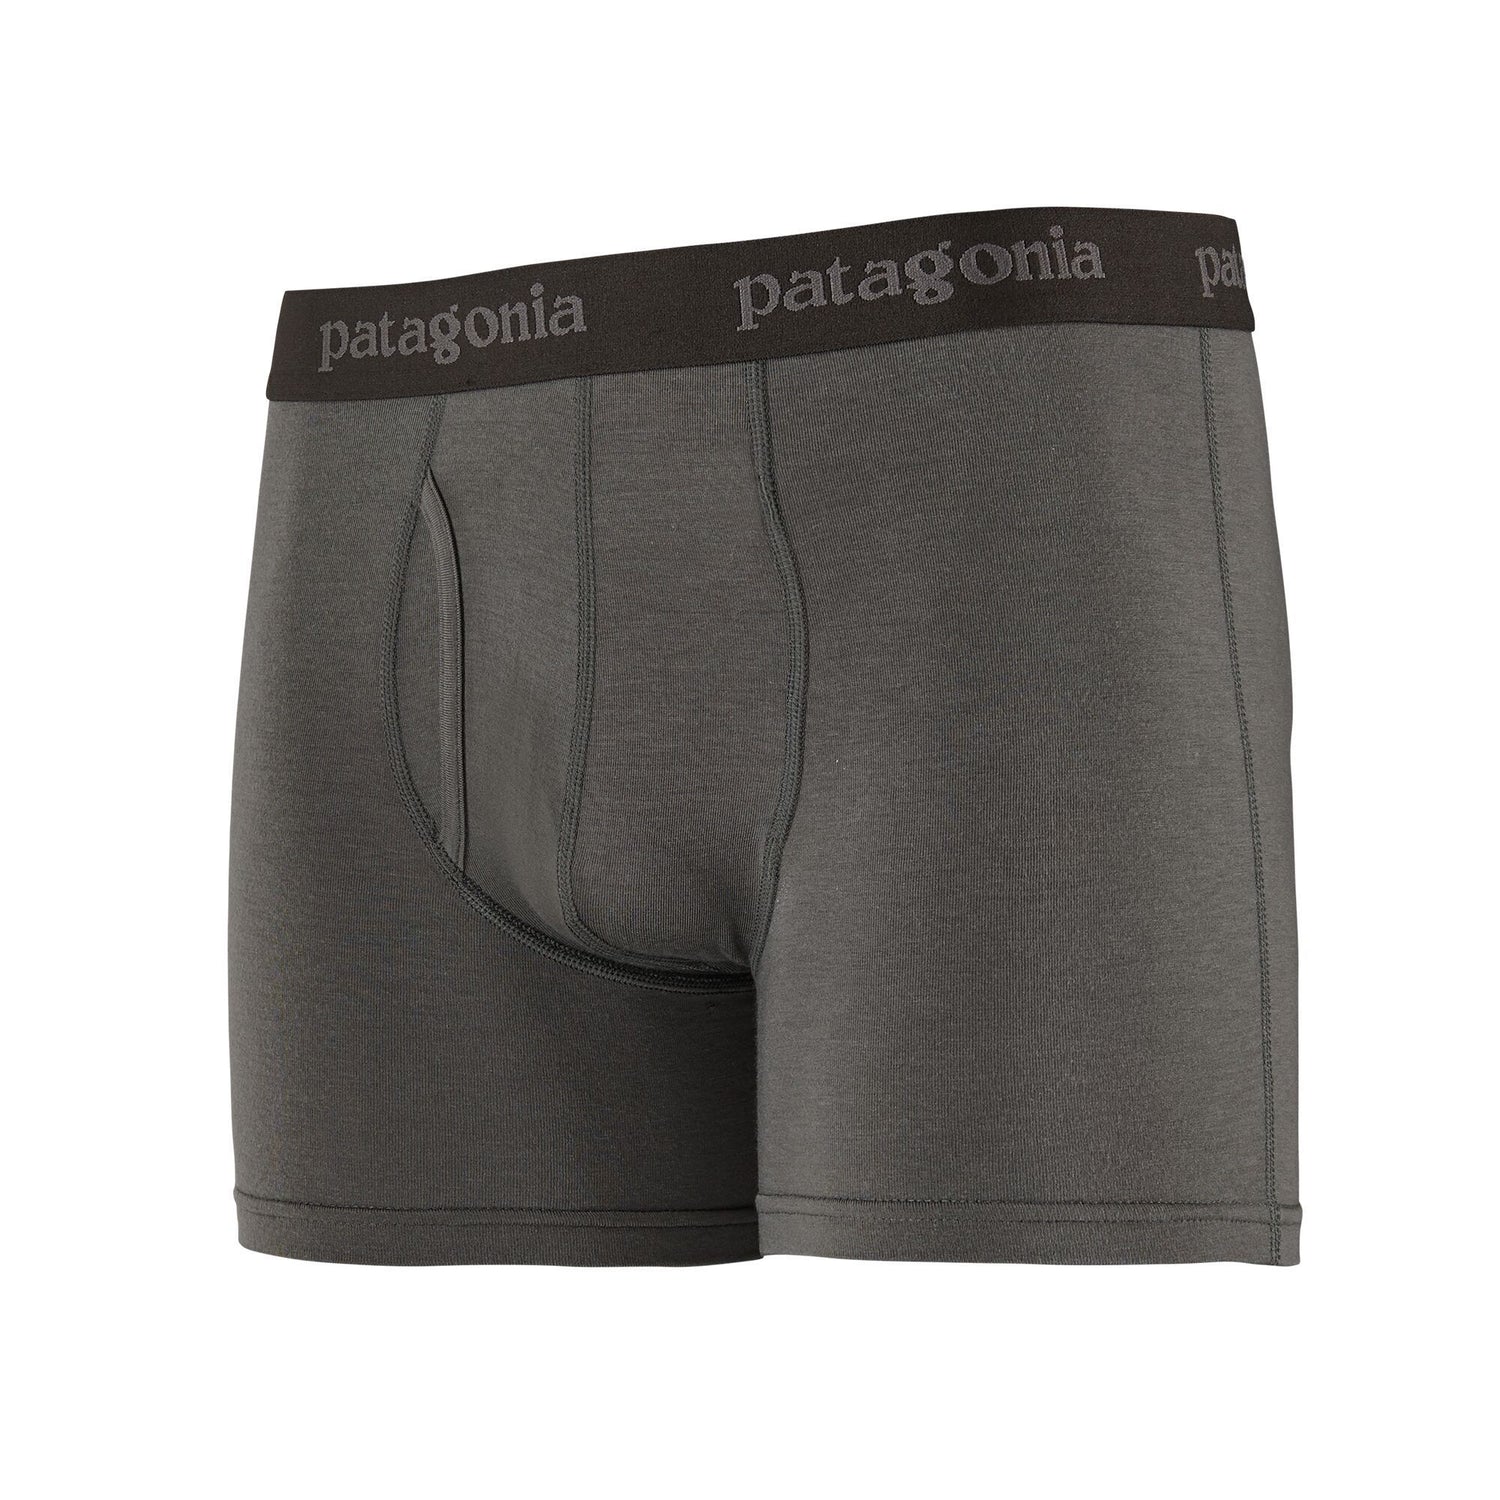 Patagonia M's Essential Boxer Briefs - From Wood-based TENCEL Forge Grey XL 3